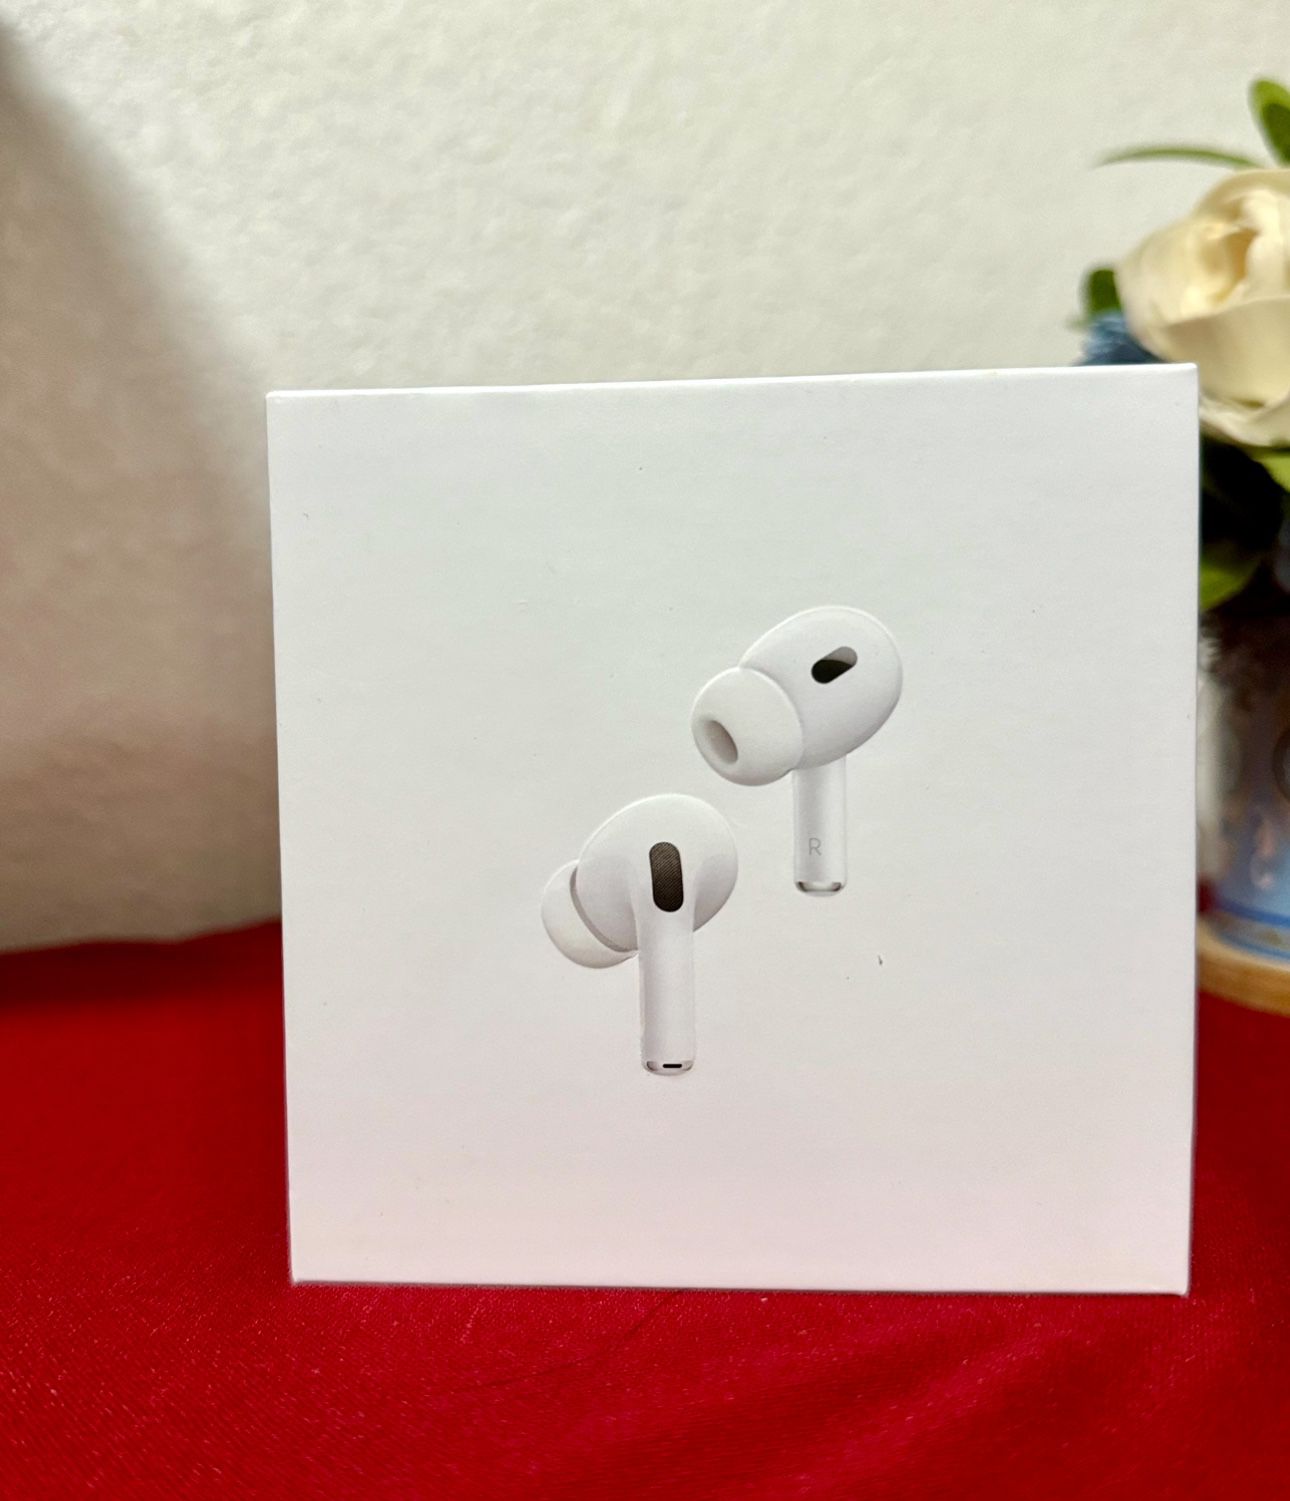 Apple AirPods Pro 2nd-Gen **BRAND-NEW SEALED***